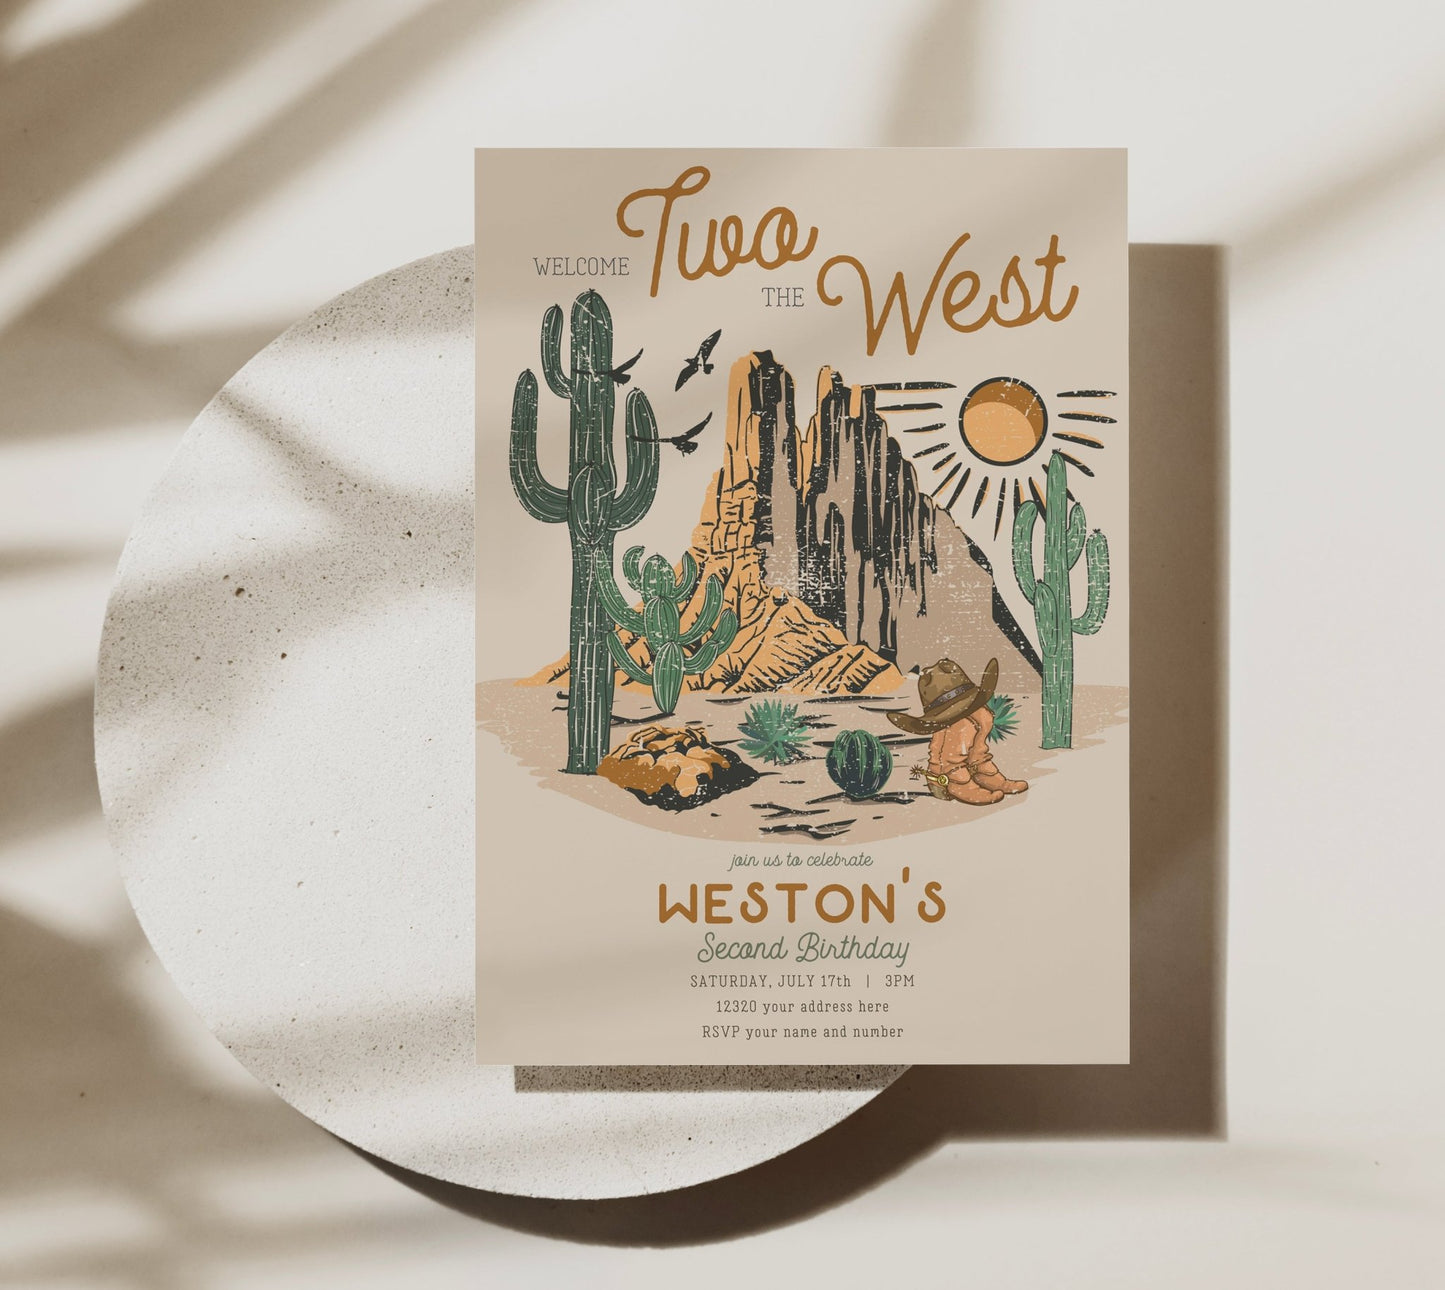 Welcome TWO the West Second Birthday Invitation Printable - High Peaks Studios